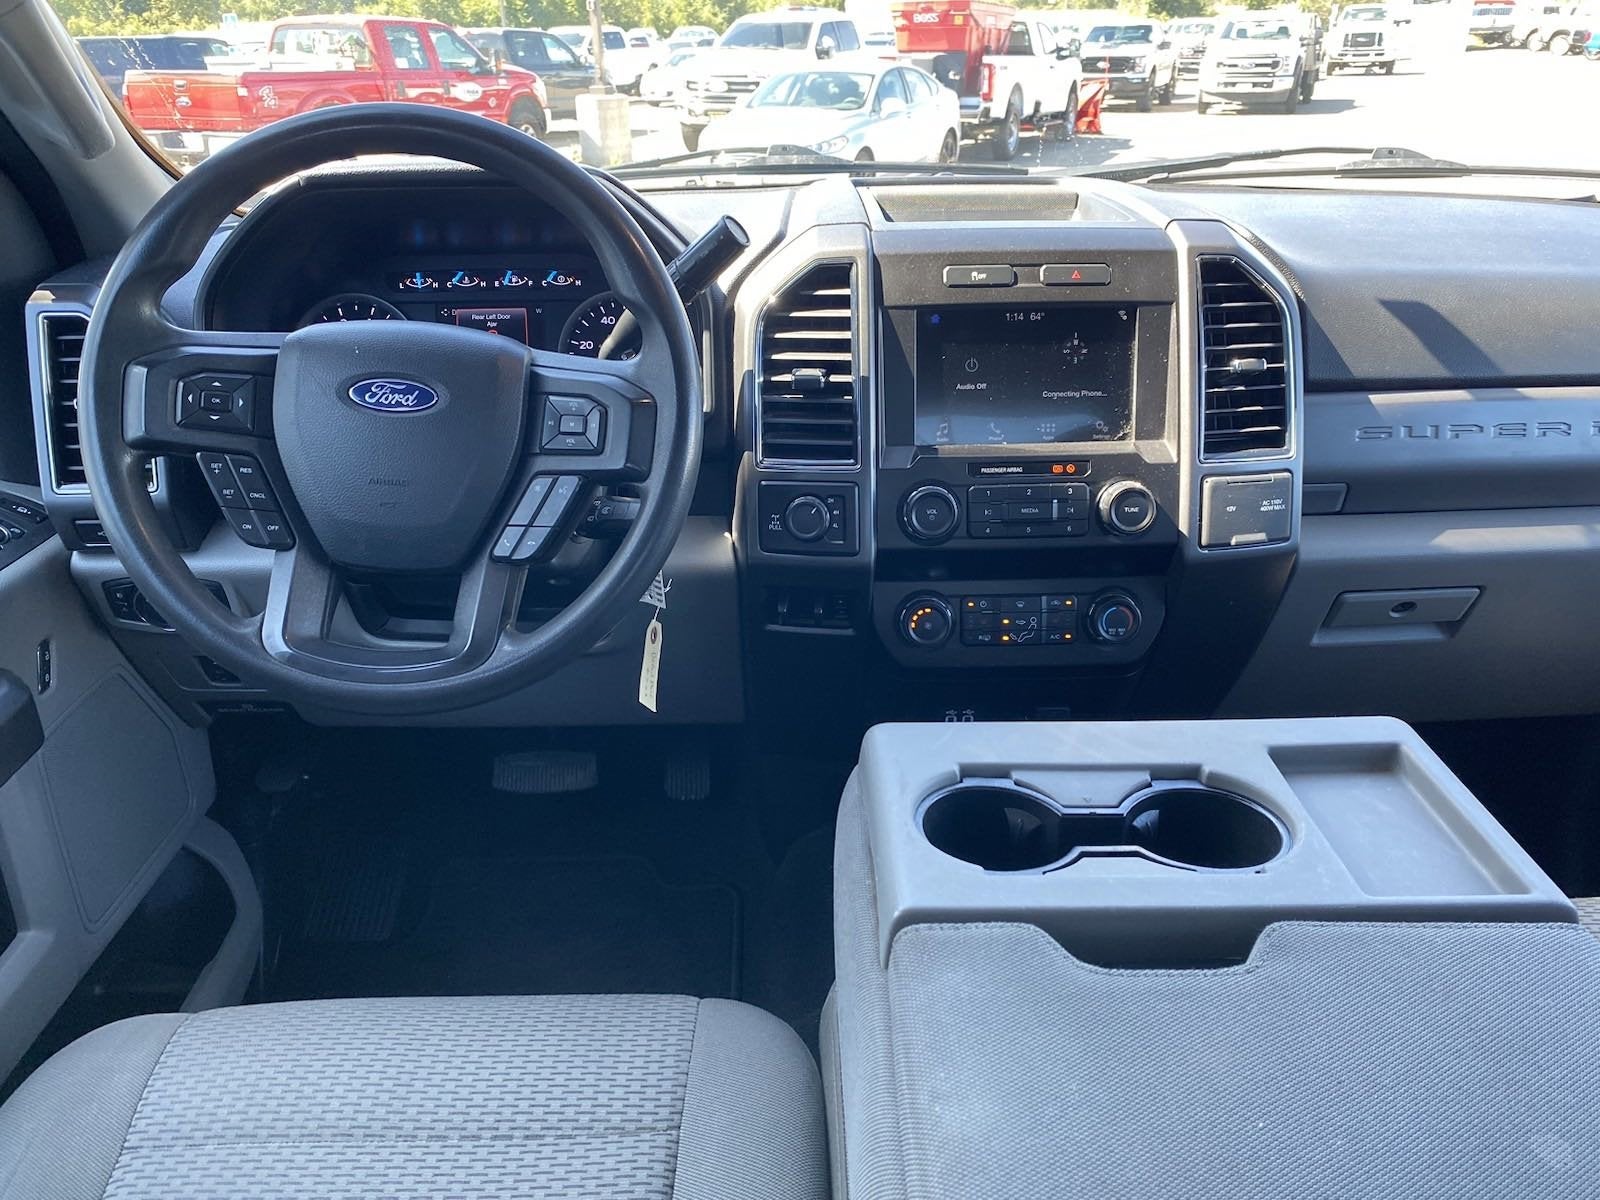 Used 2019 Ford F-350 Super Duty King Ranch with VIN 1FT8W3B64KED83516 for sale in Jordan, Minnesota